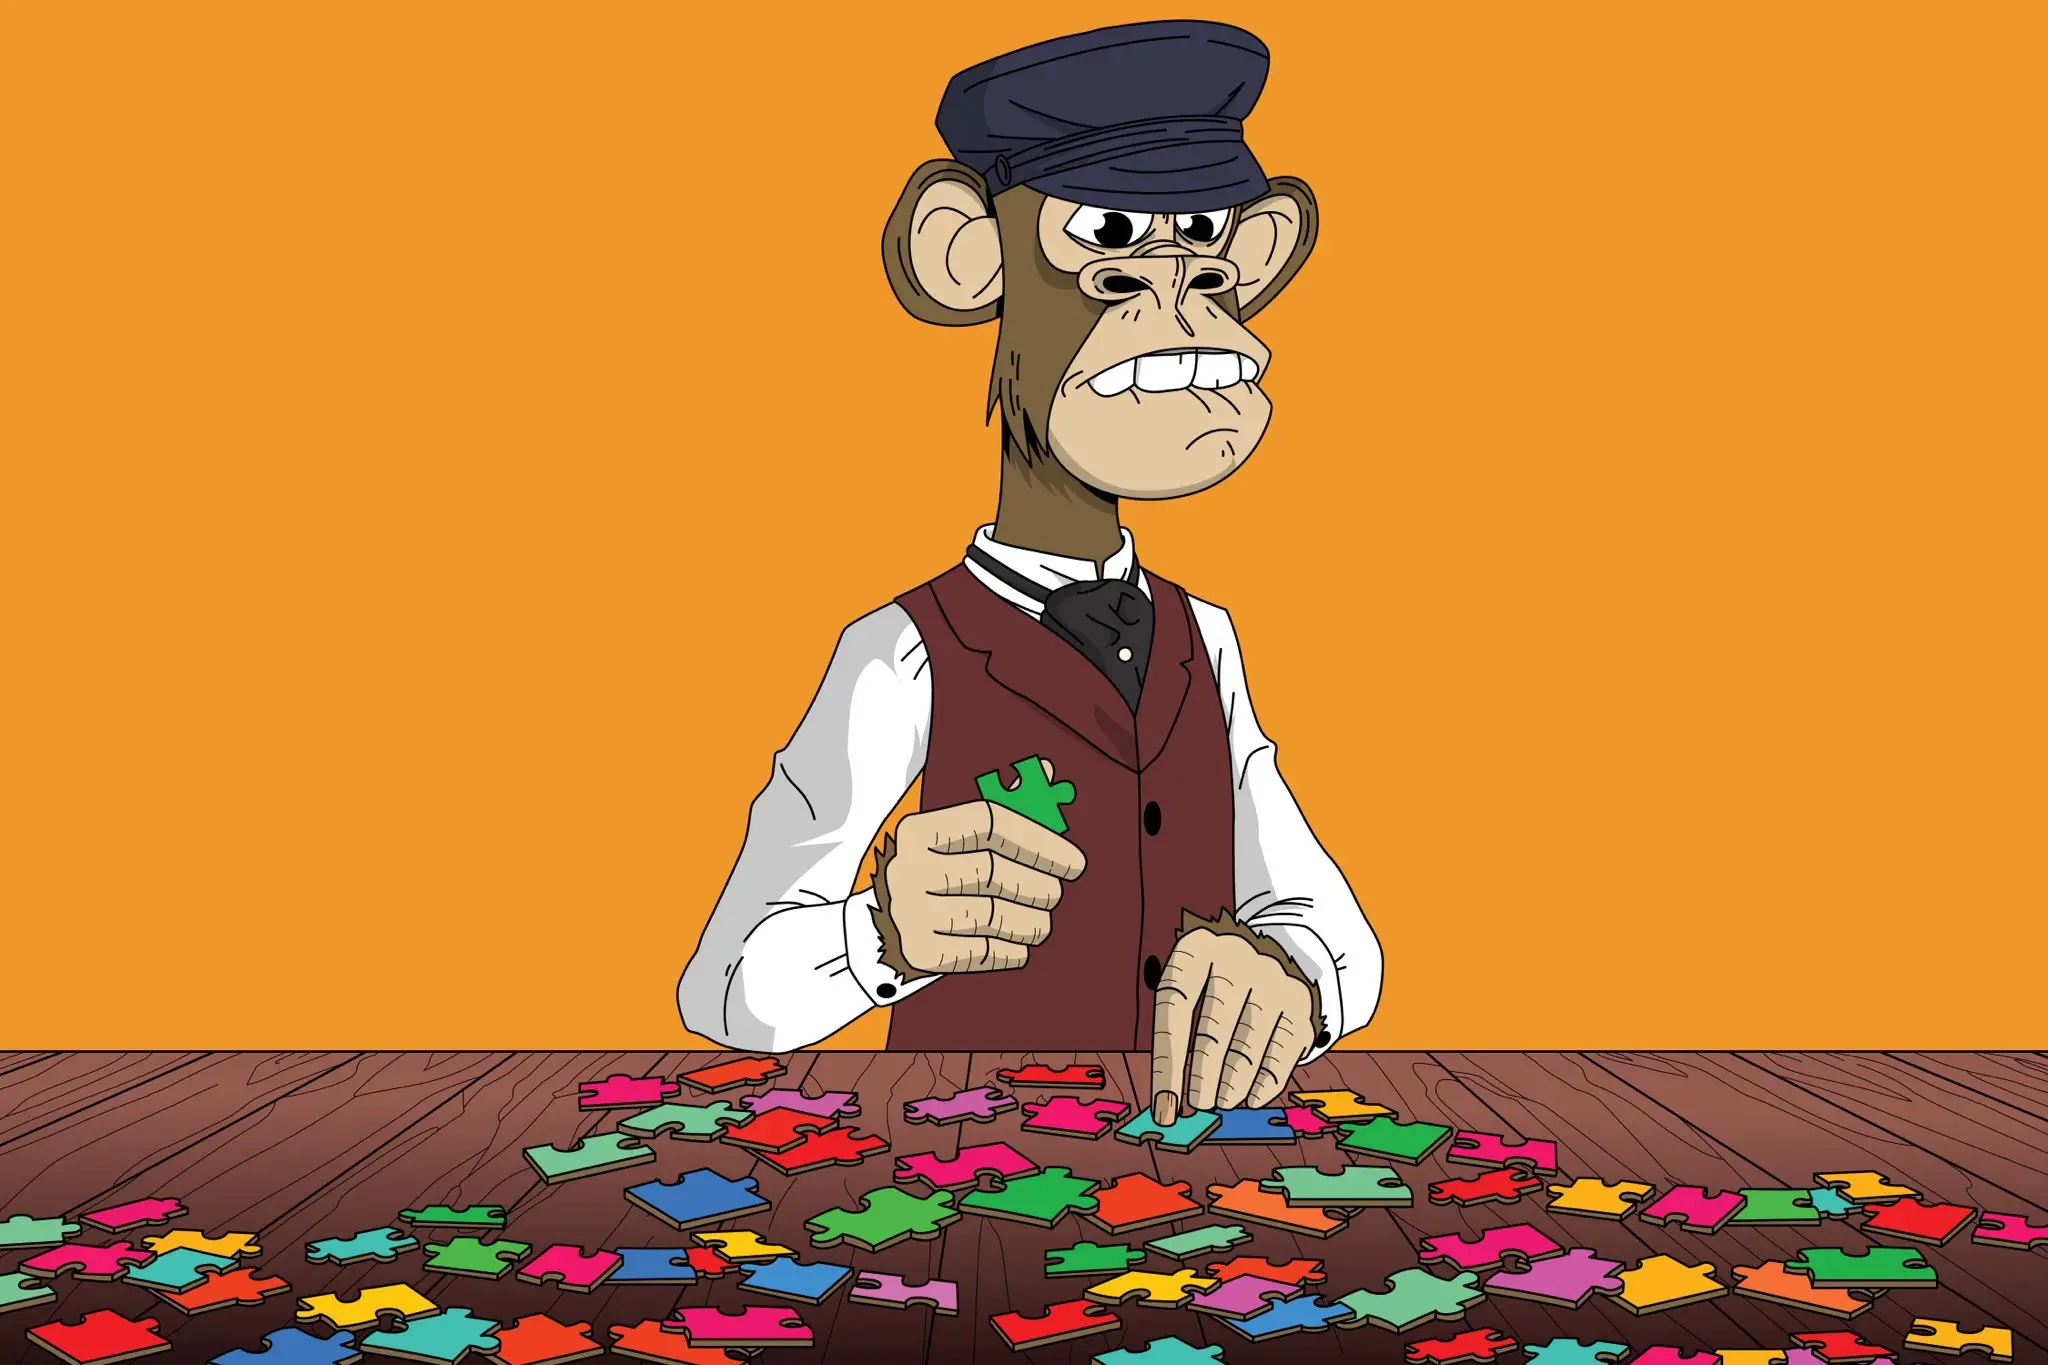 Jenkins the Vallet puzzles gamified NFT drop